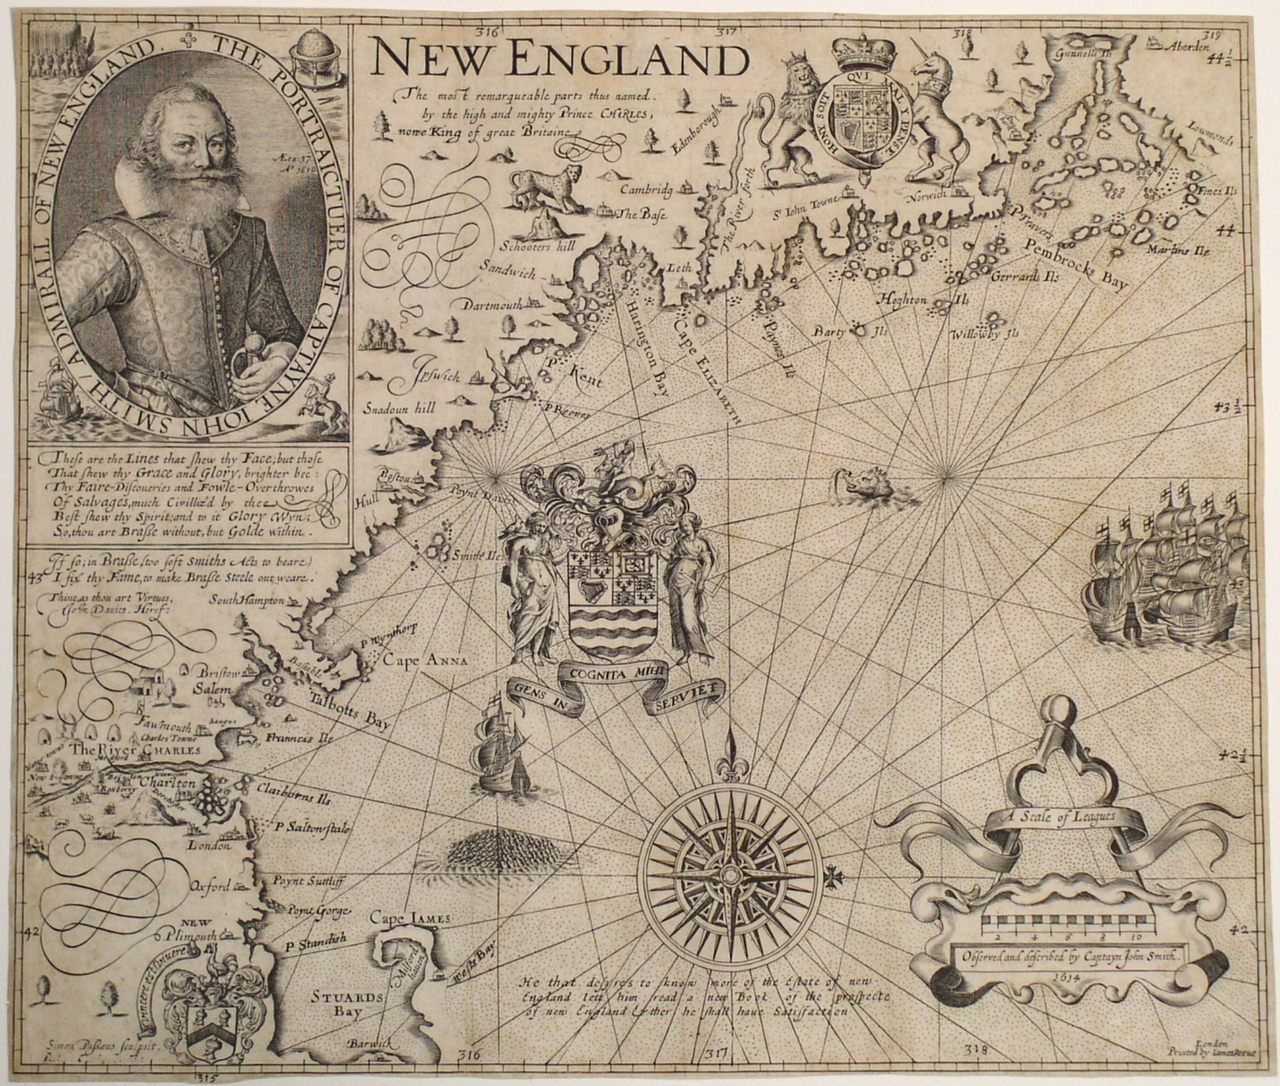 "New England, The most remarqueable parts thus named by the high and might Prince Charles, Prince of Great Britaine."